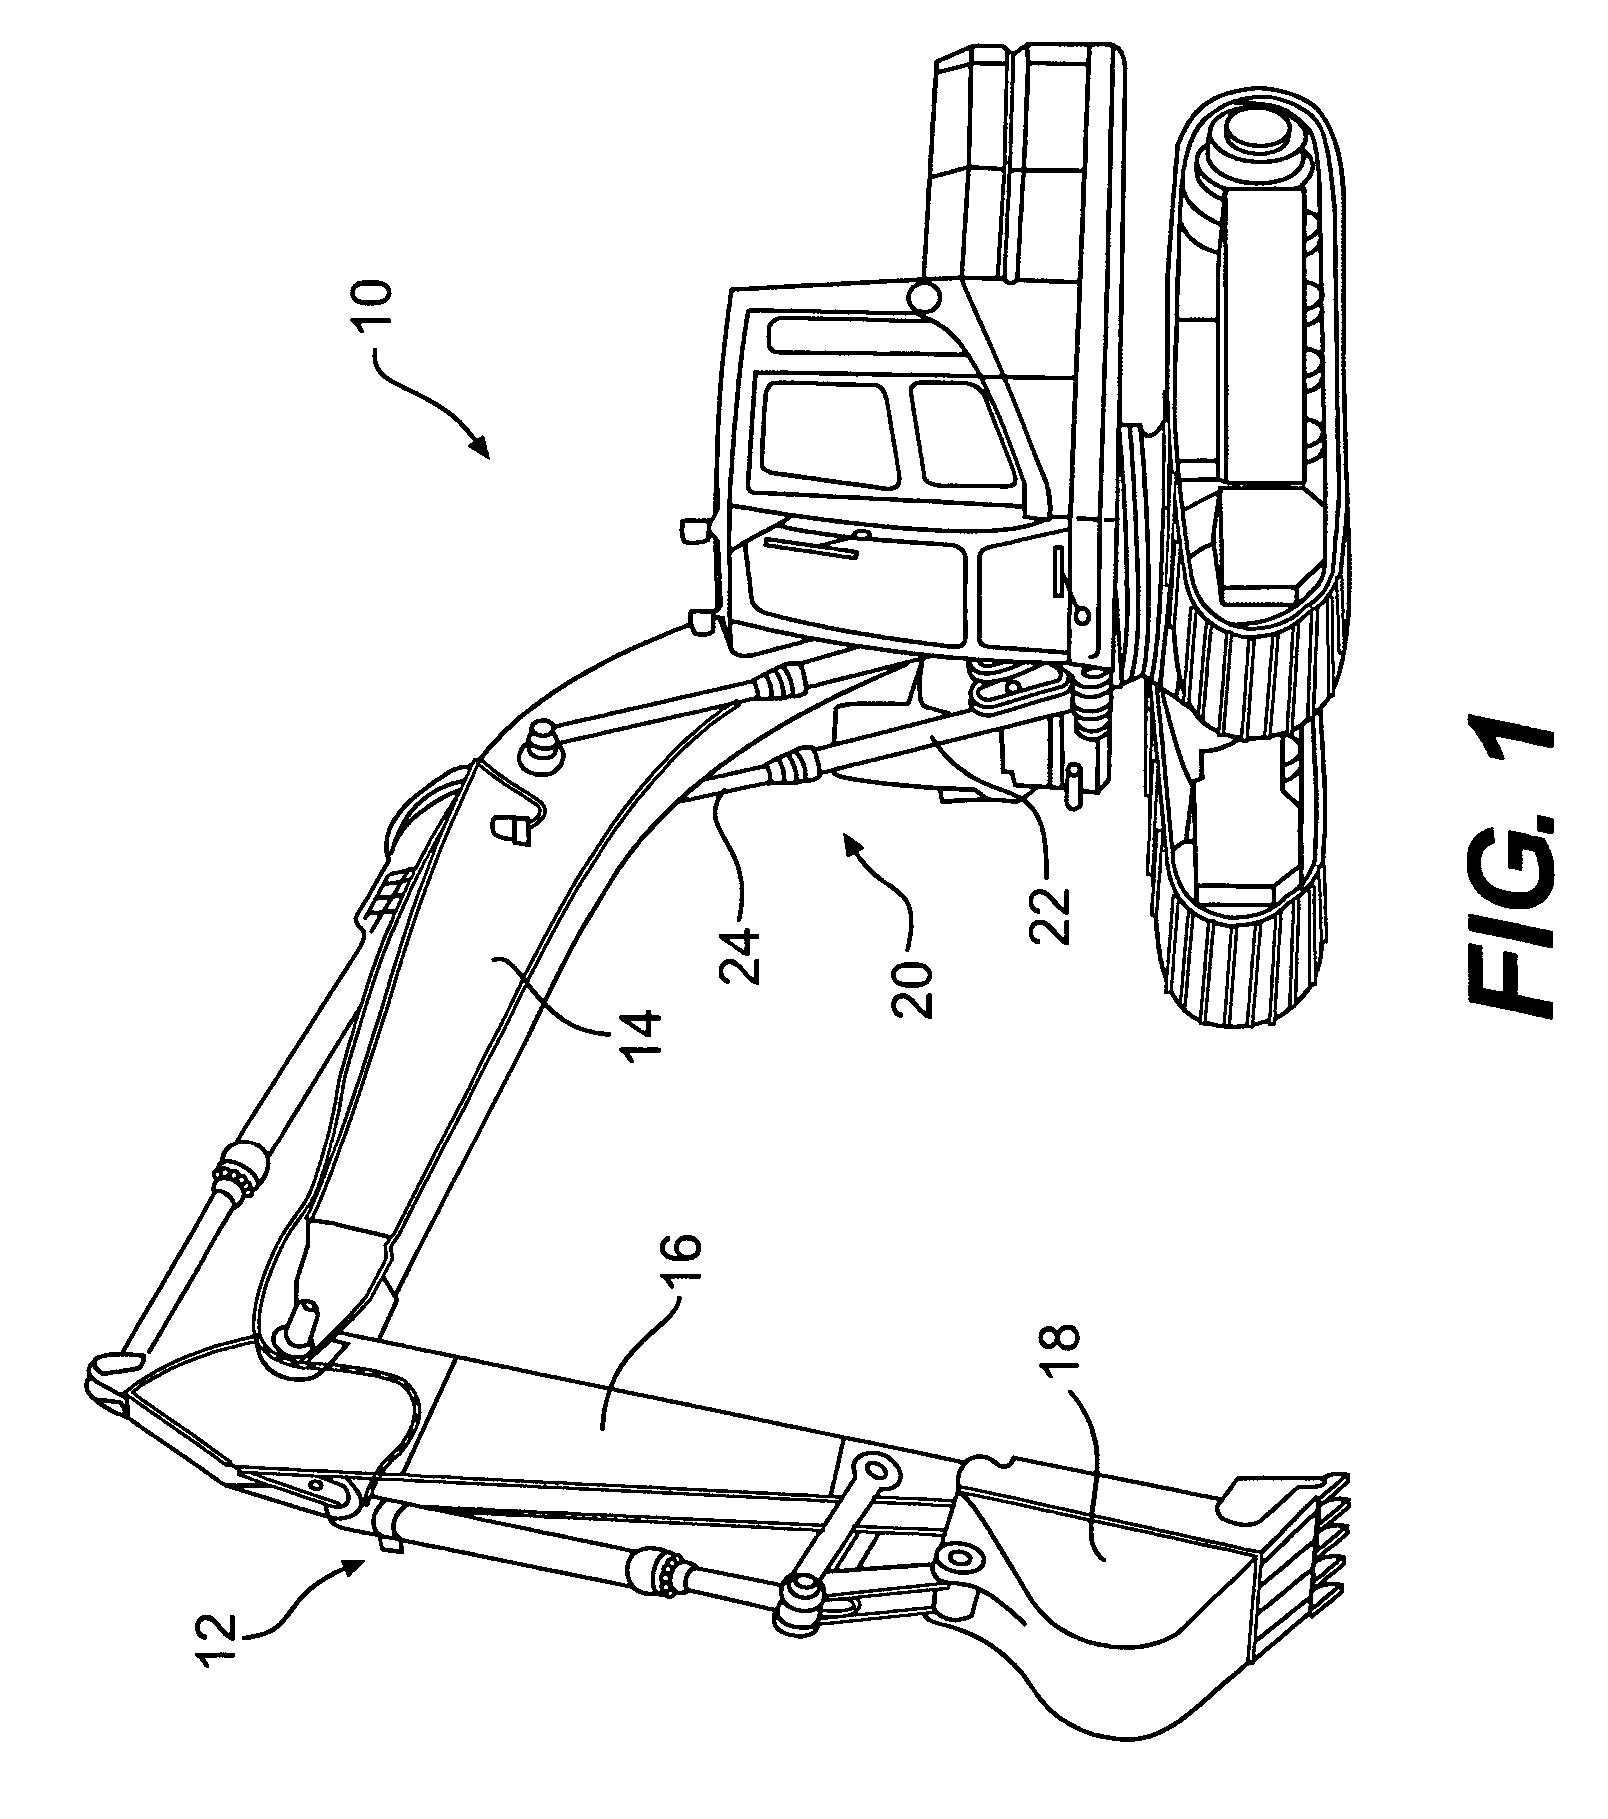 Hydraulic system for recovering potential energy